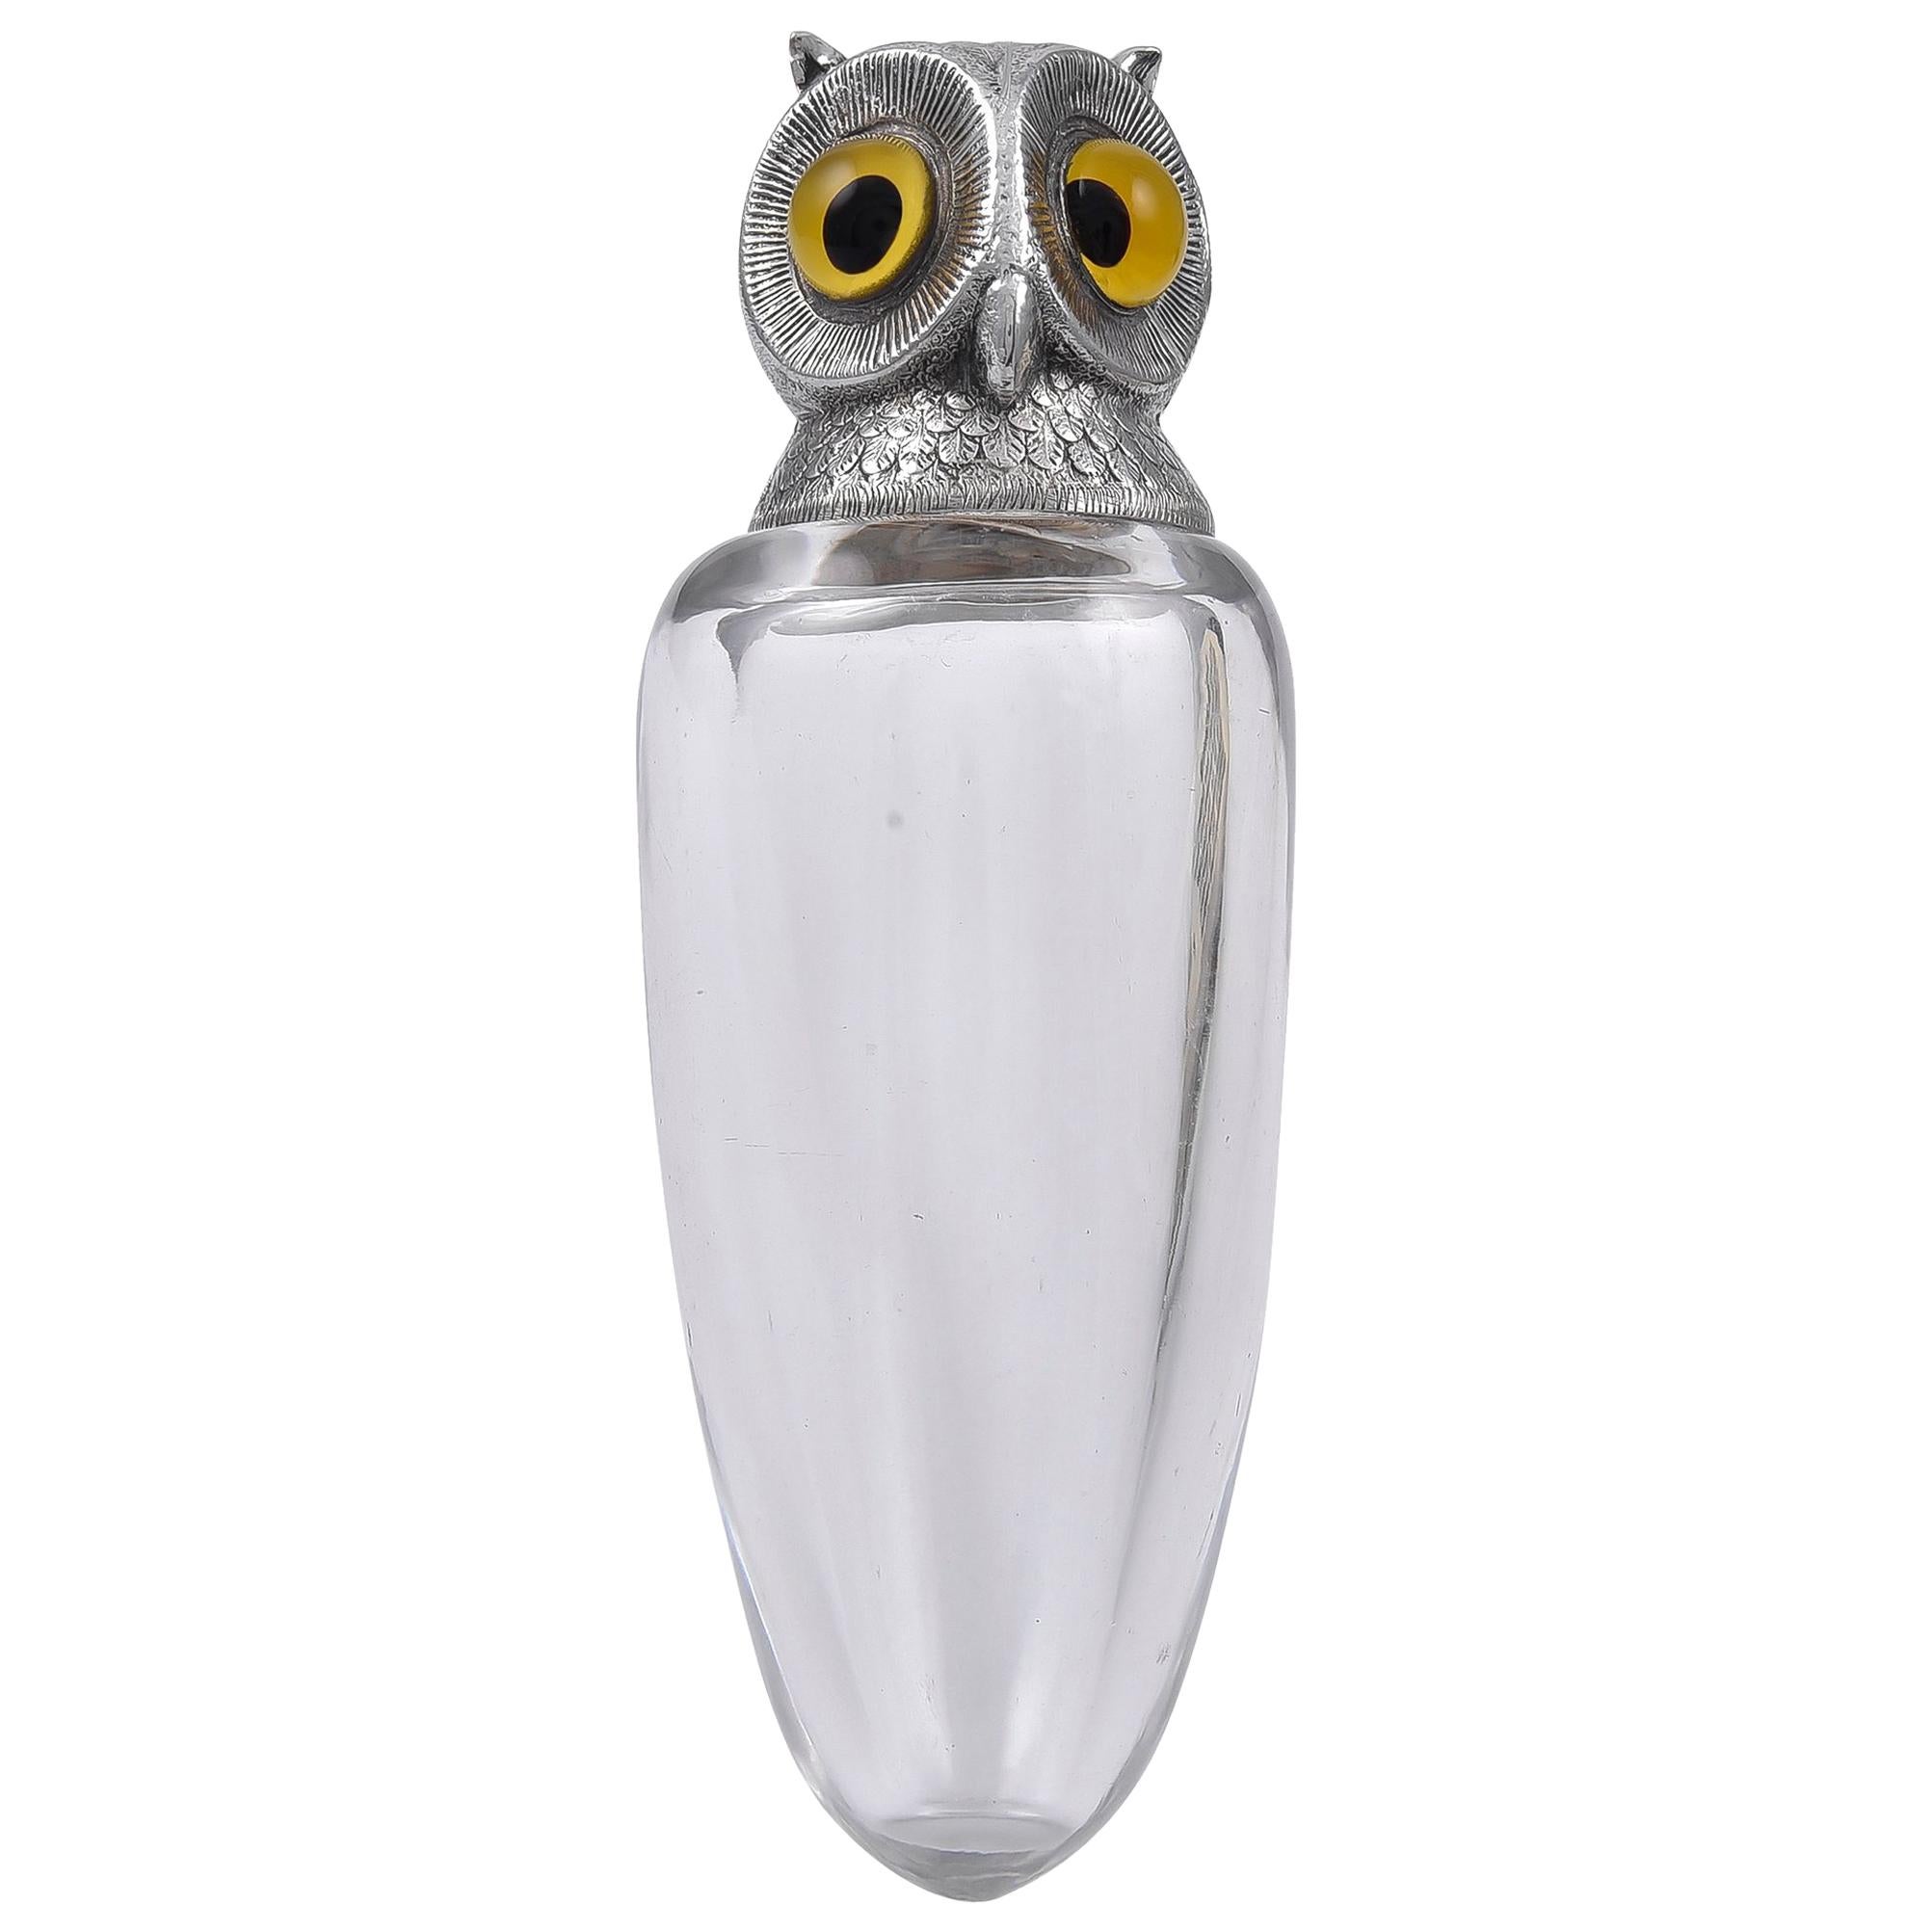 Owl With Huge Eyes Eagle Keychain Pendant Silver Made of Metal 